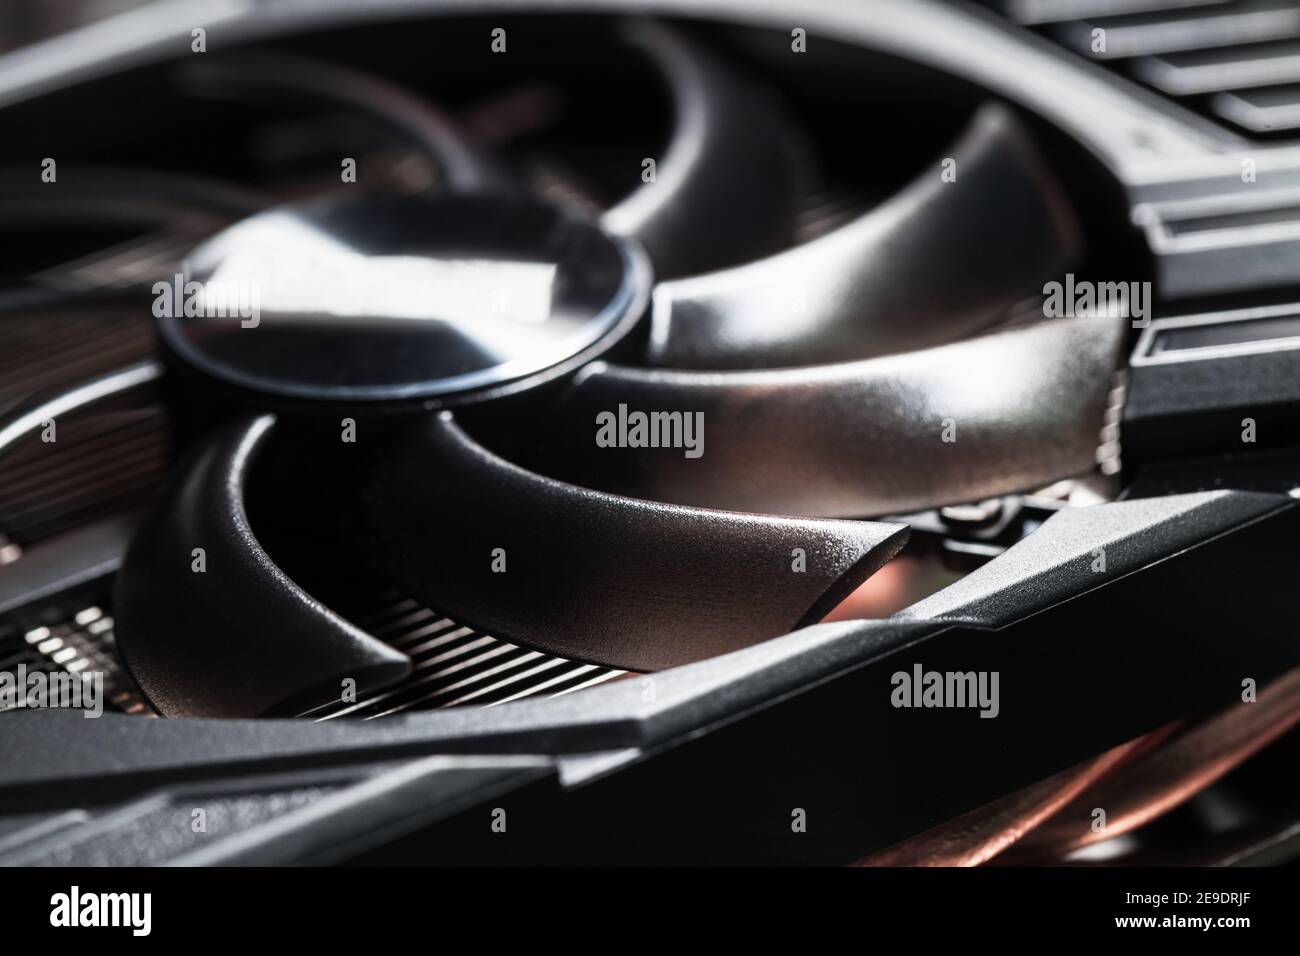 New shiny black plastic GPU cooler, close-up photo with selective focus. This fan is mounted on a video card to cool the GPU Stock Photo